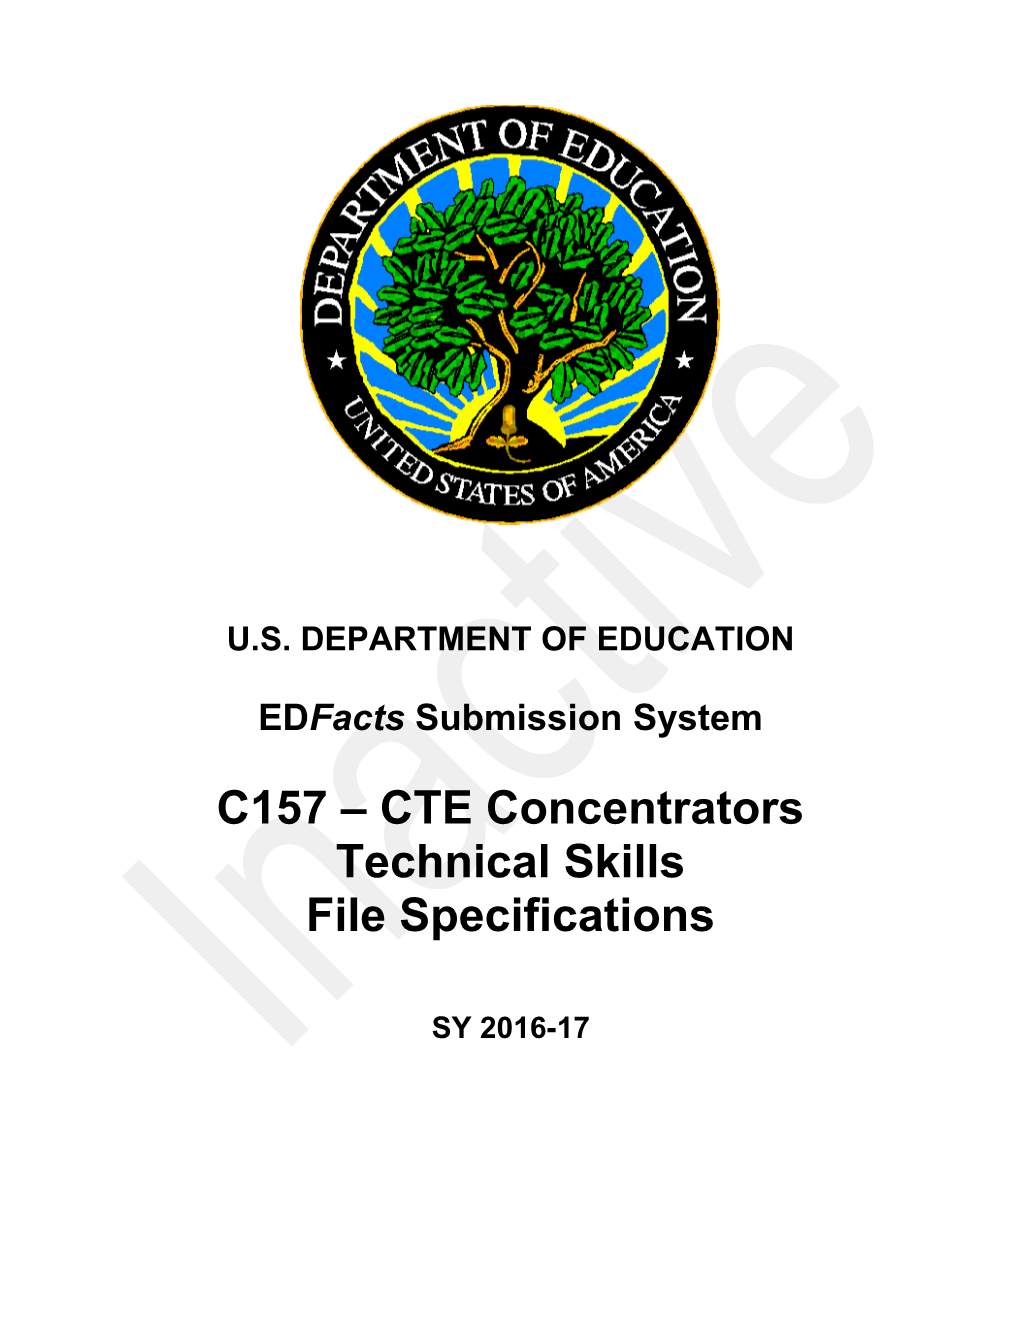 C157 - CTE Concentrators Technical Skills File Specifications (Msword)